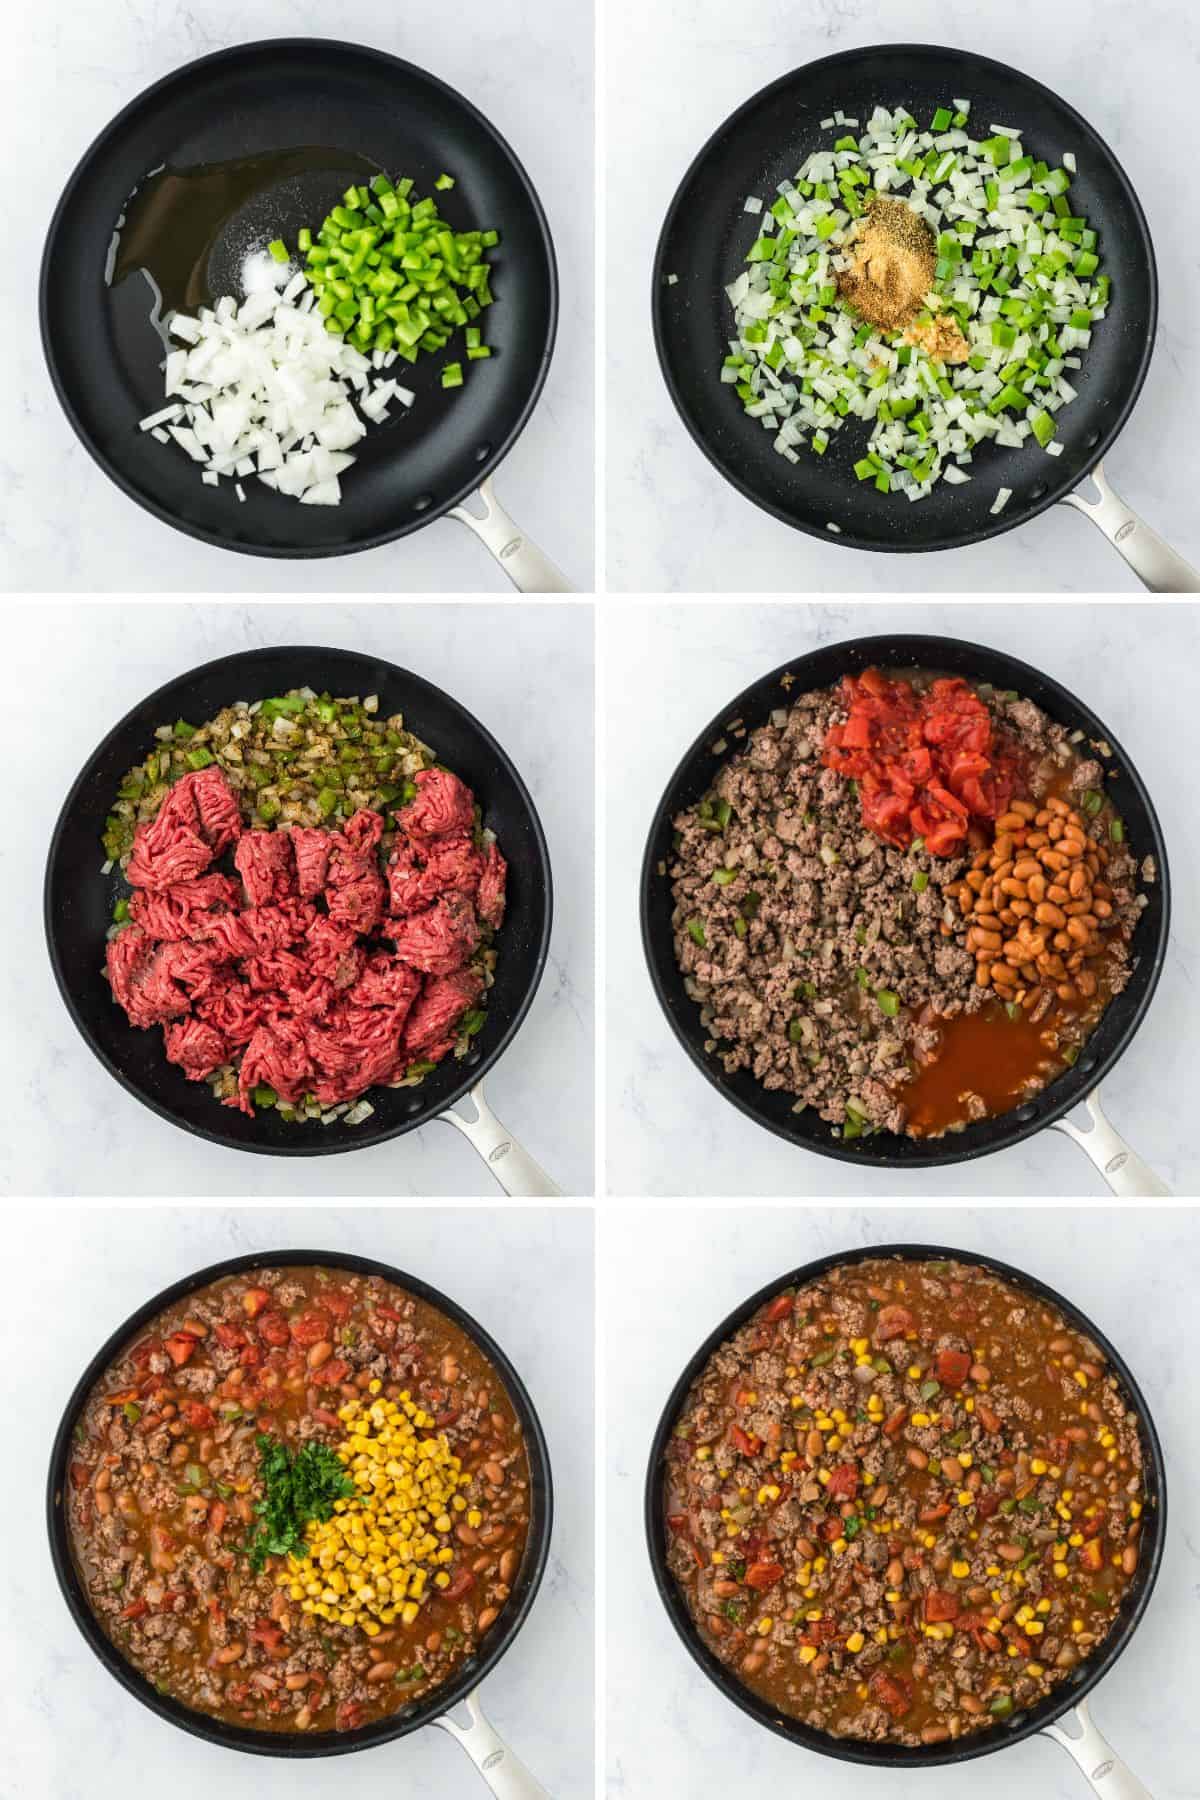 A step by step image collage of how to make frito pie with cooking all the ingredients for the filling on a skillet